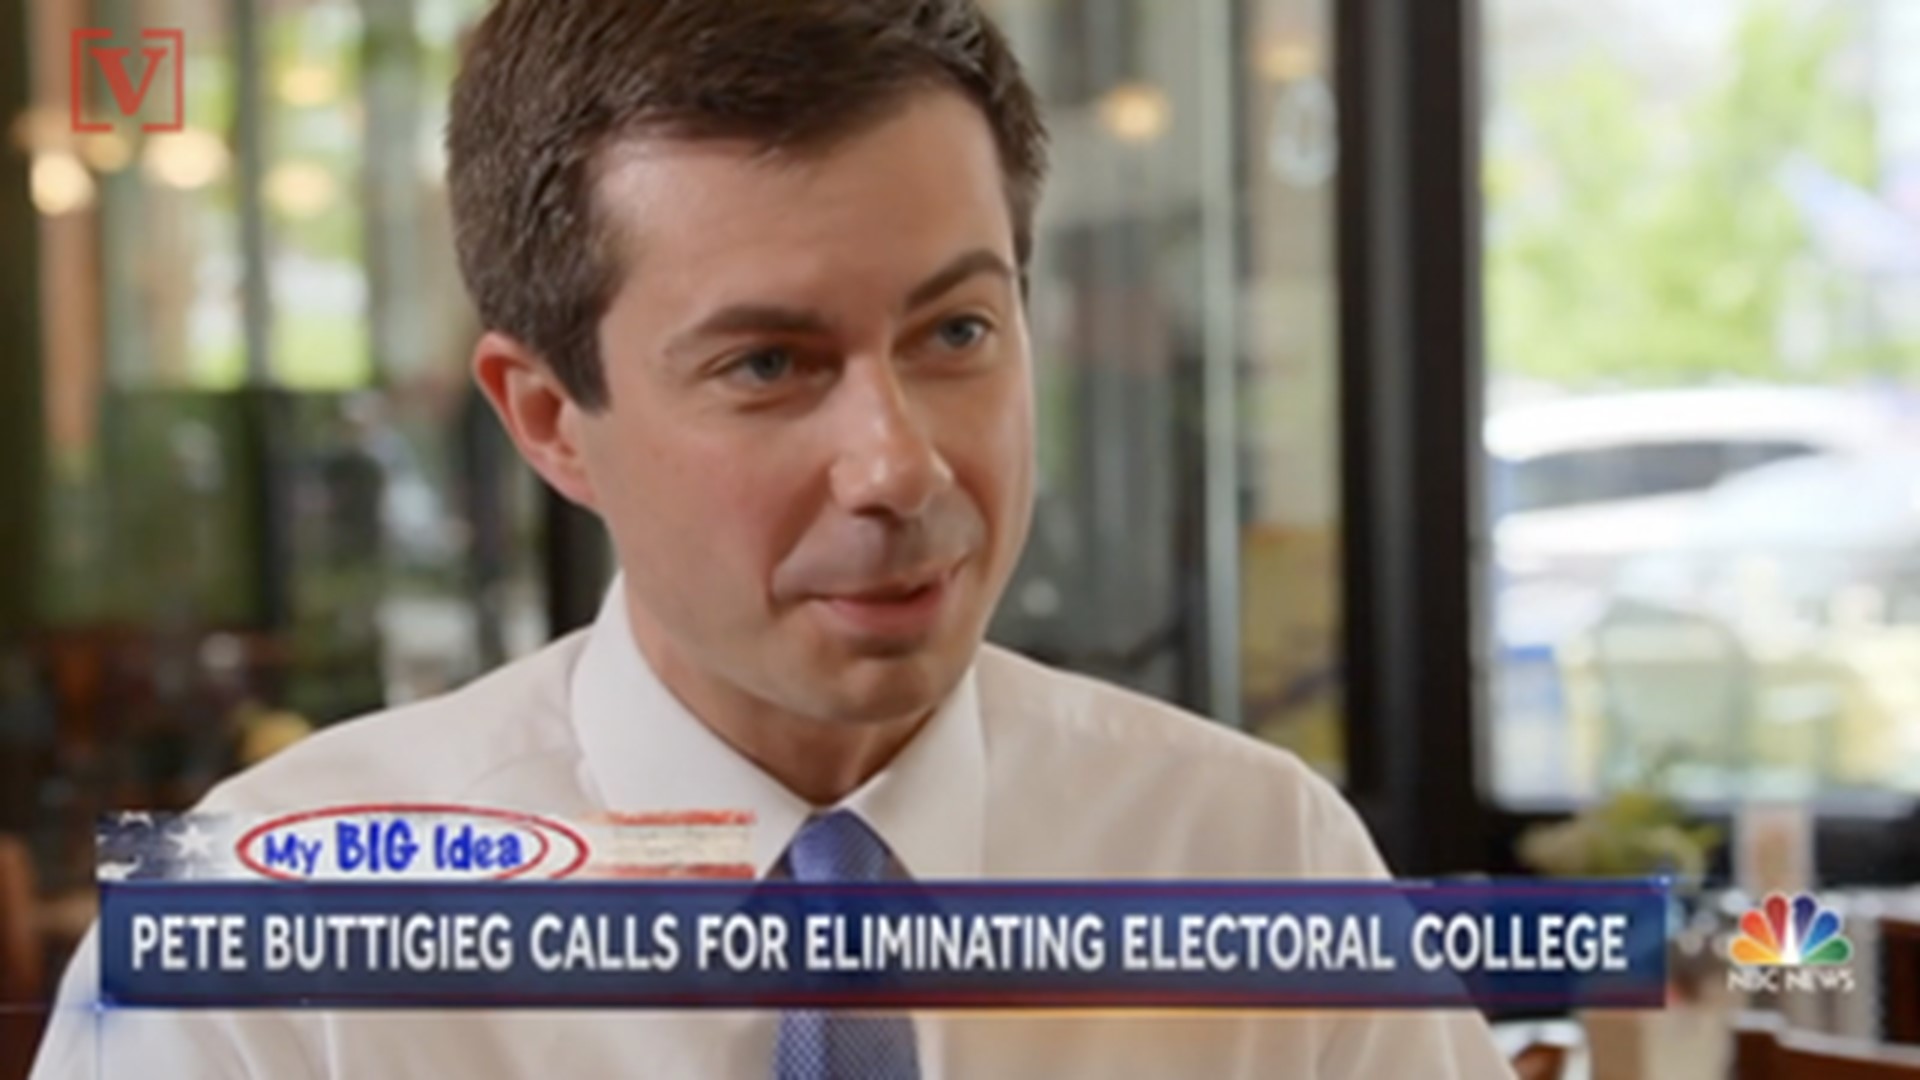 After seeing the popular vote winner lose twice in the last five presidential elections, Pete Buttigieg has called for eliminating the electoral college. Veuer's Justin Kircher has the story.